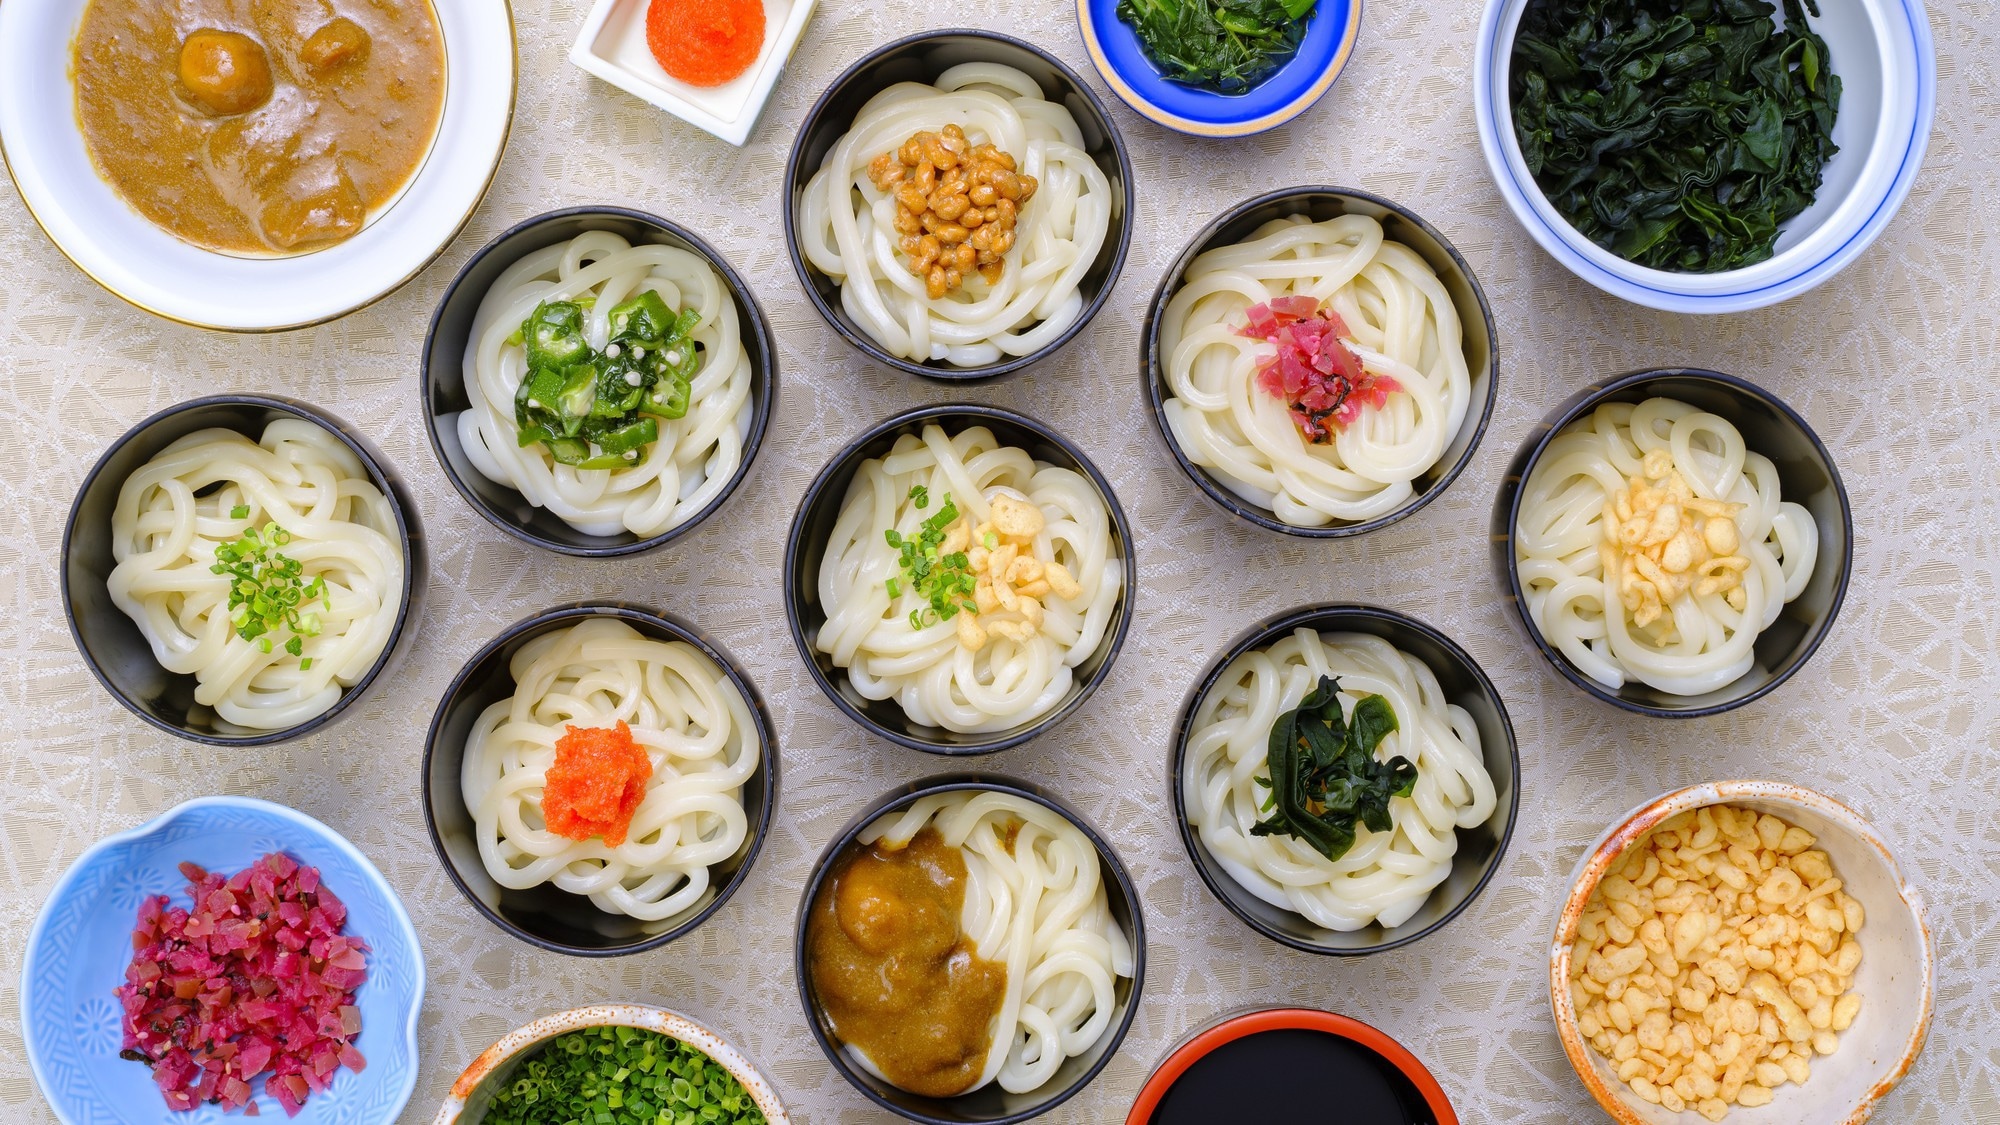 ■Riga's specialty "Sanuki udon" toppings are also available.